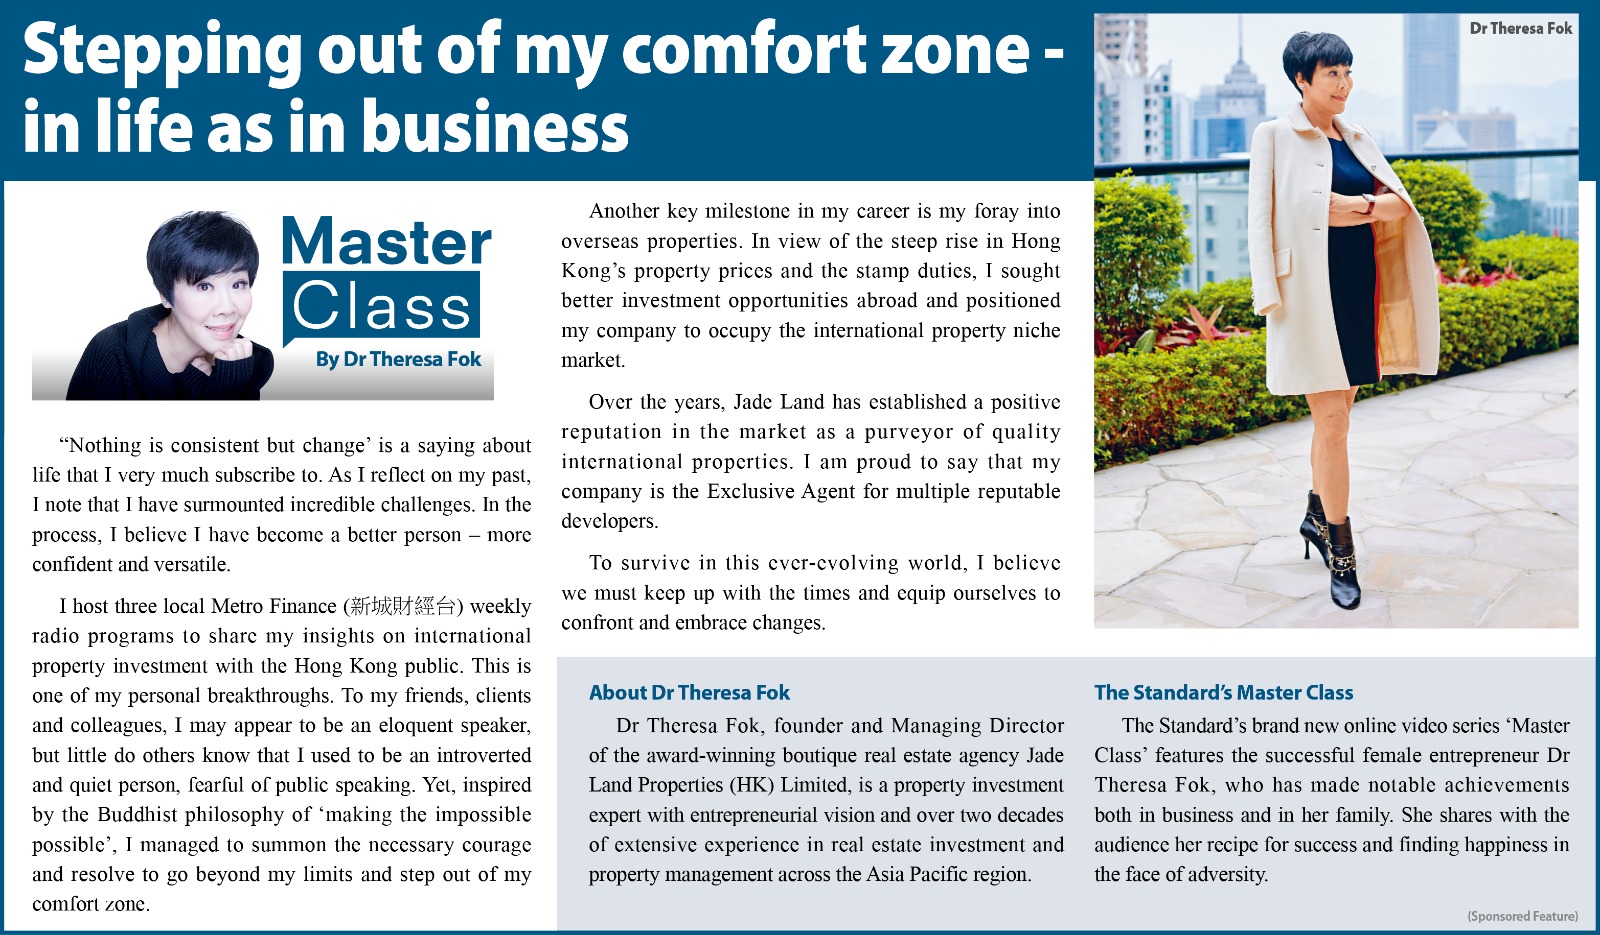 The Standard’s Masterclass -Stepping out of my comfort zone in life as in business